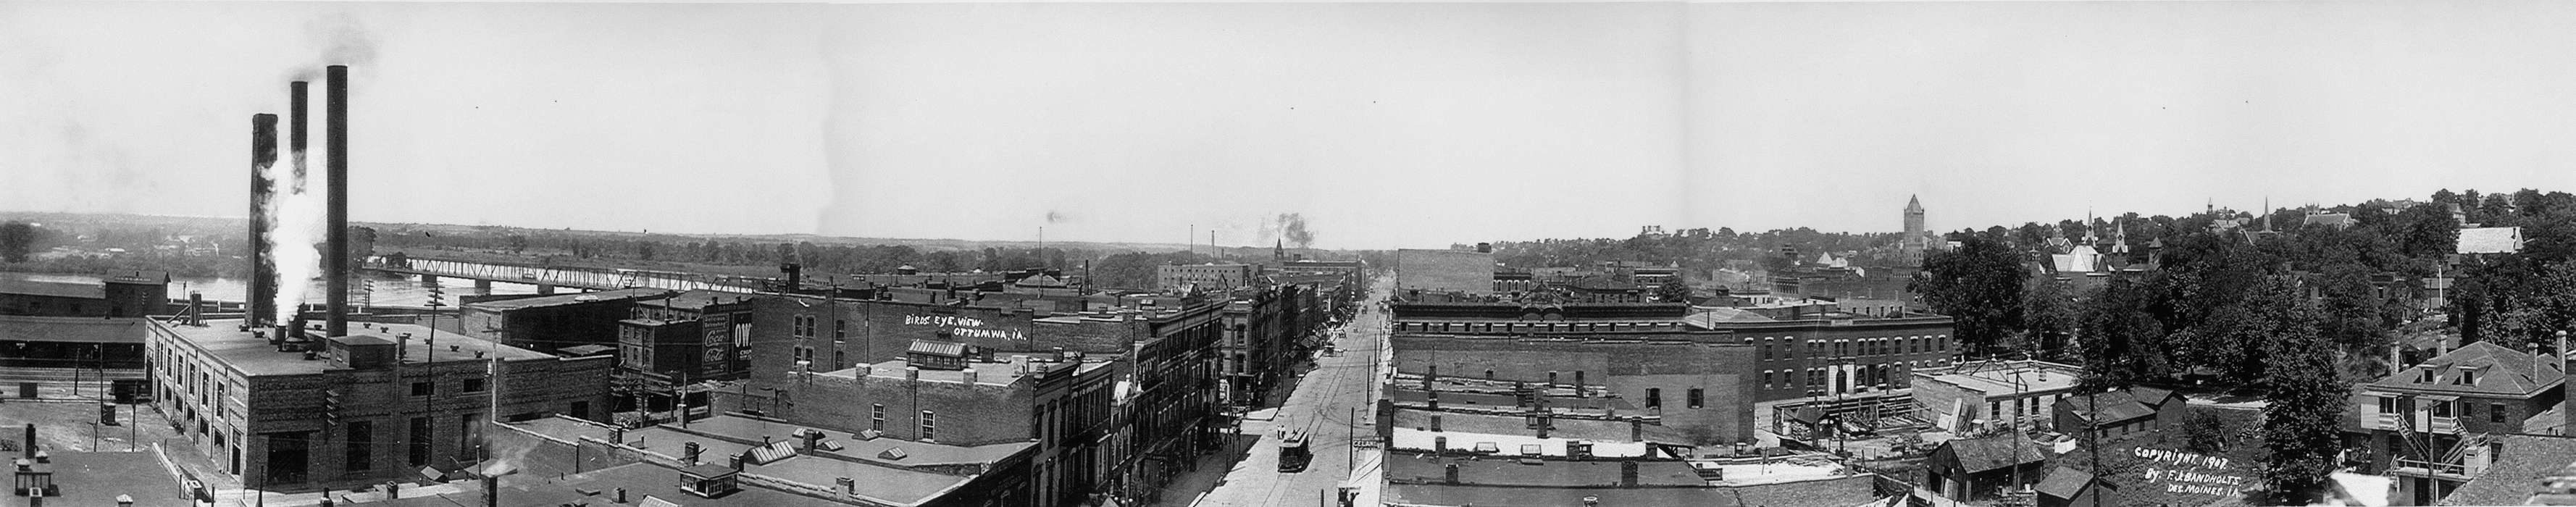 chimney, Businesses and Factories, mainstreet, history of Iowa, Iowa History, Cities and Towns, factory, Ottumwa, IA, Main Streets & Town Squares, Iowa, Lemberger, LeAnn